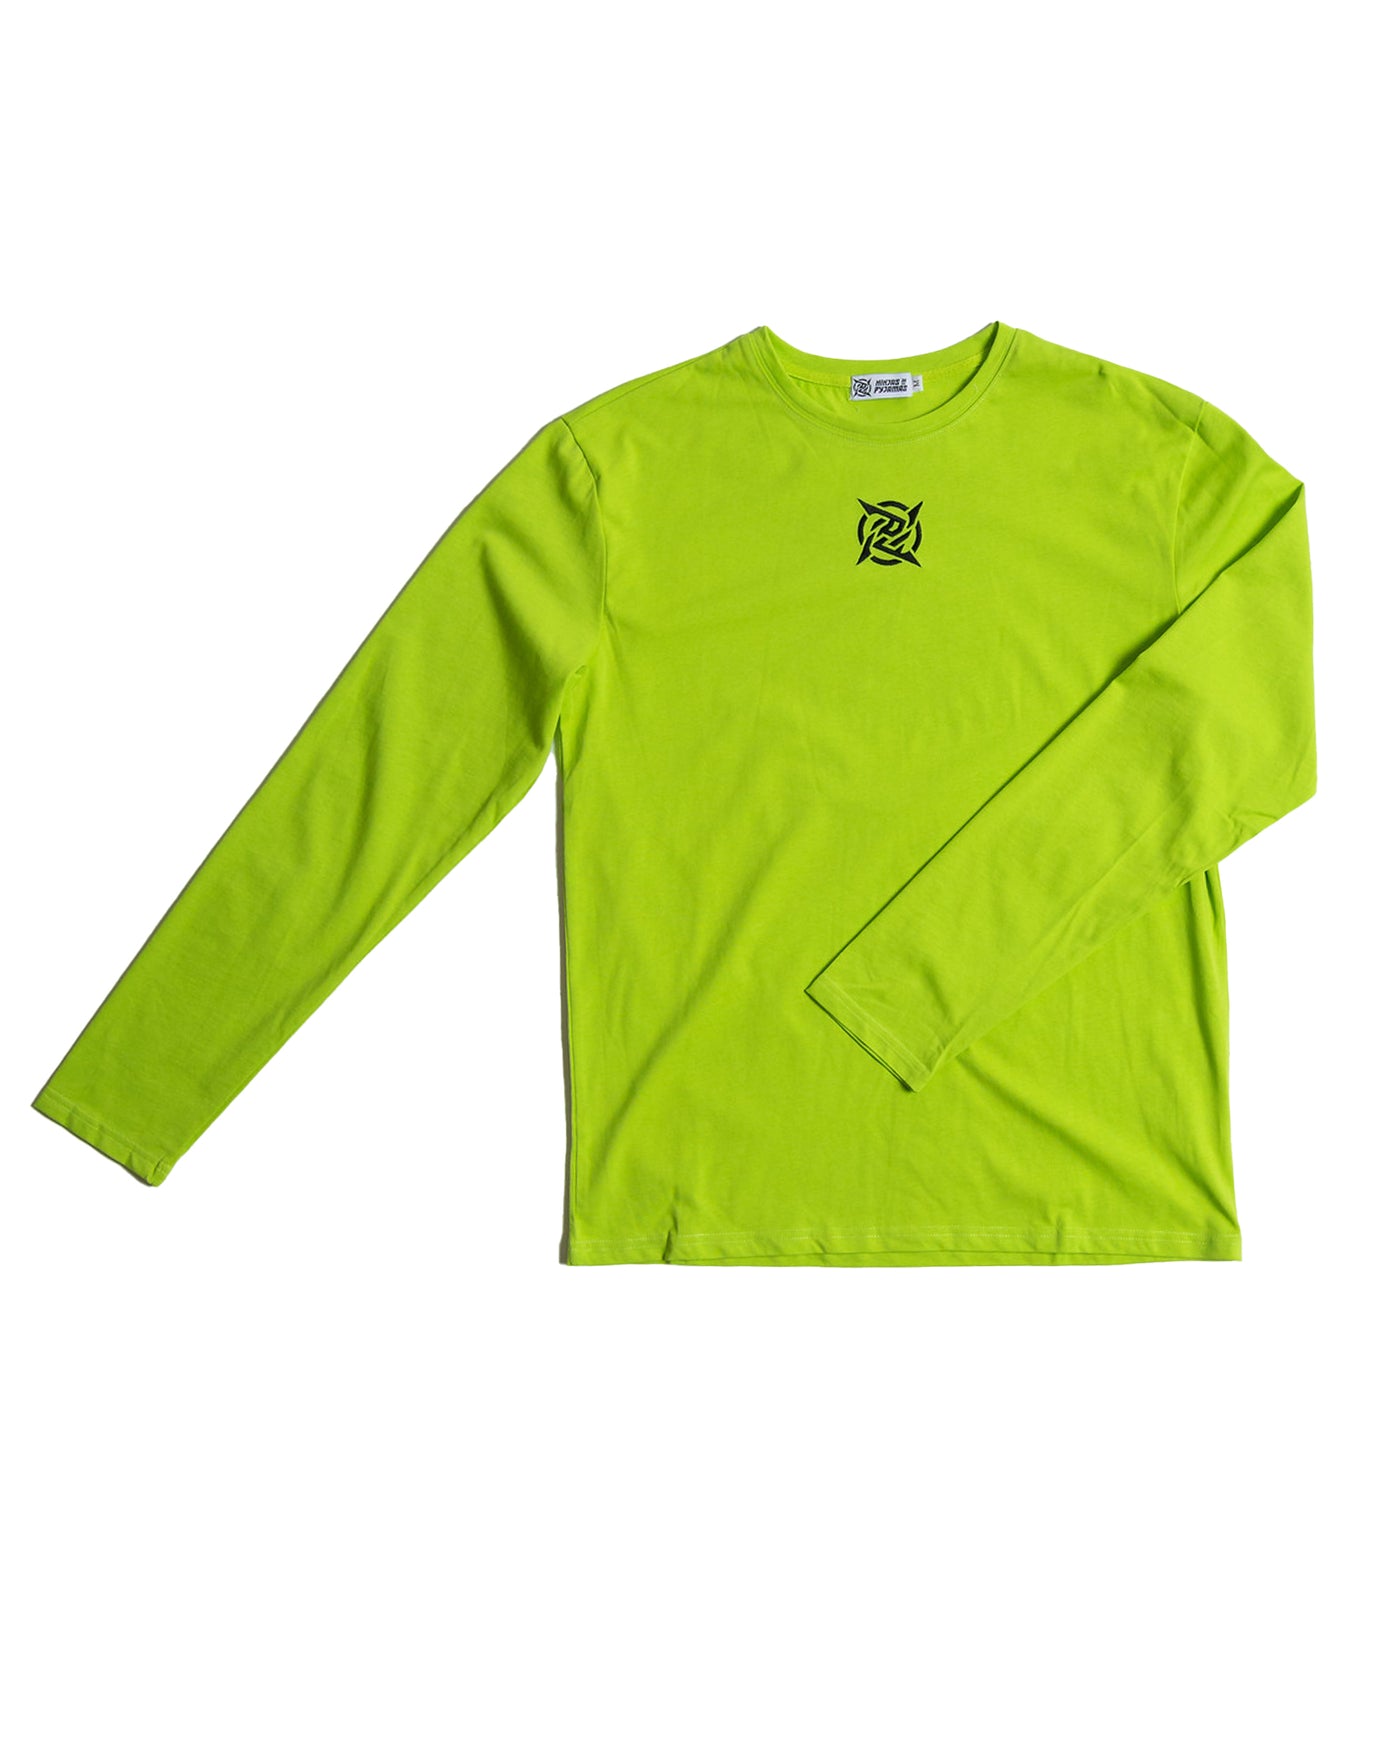 Lagom Collection - Neon Long Sleeve from Ninjas in Pyjamas Shop. A neon-colored long sleeve shirt from the Lagom Merch Collection, with the Ninjas in Pyjamas logo subtly printed on the sleeve. This vibrant and stylish long sleeve is perfect for making a statement and showing support for NIP in a bold and fashionable way.